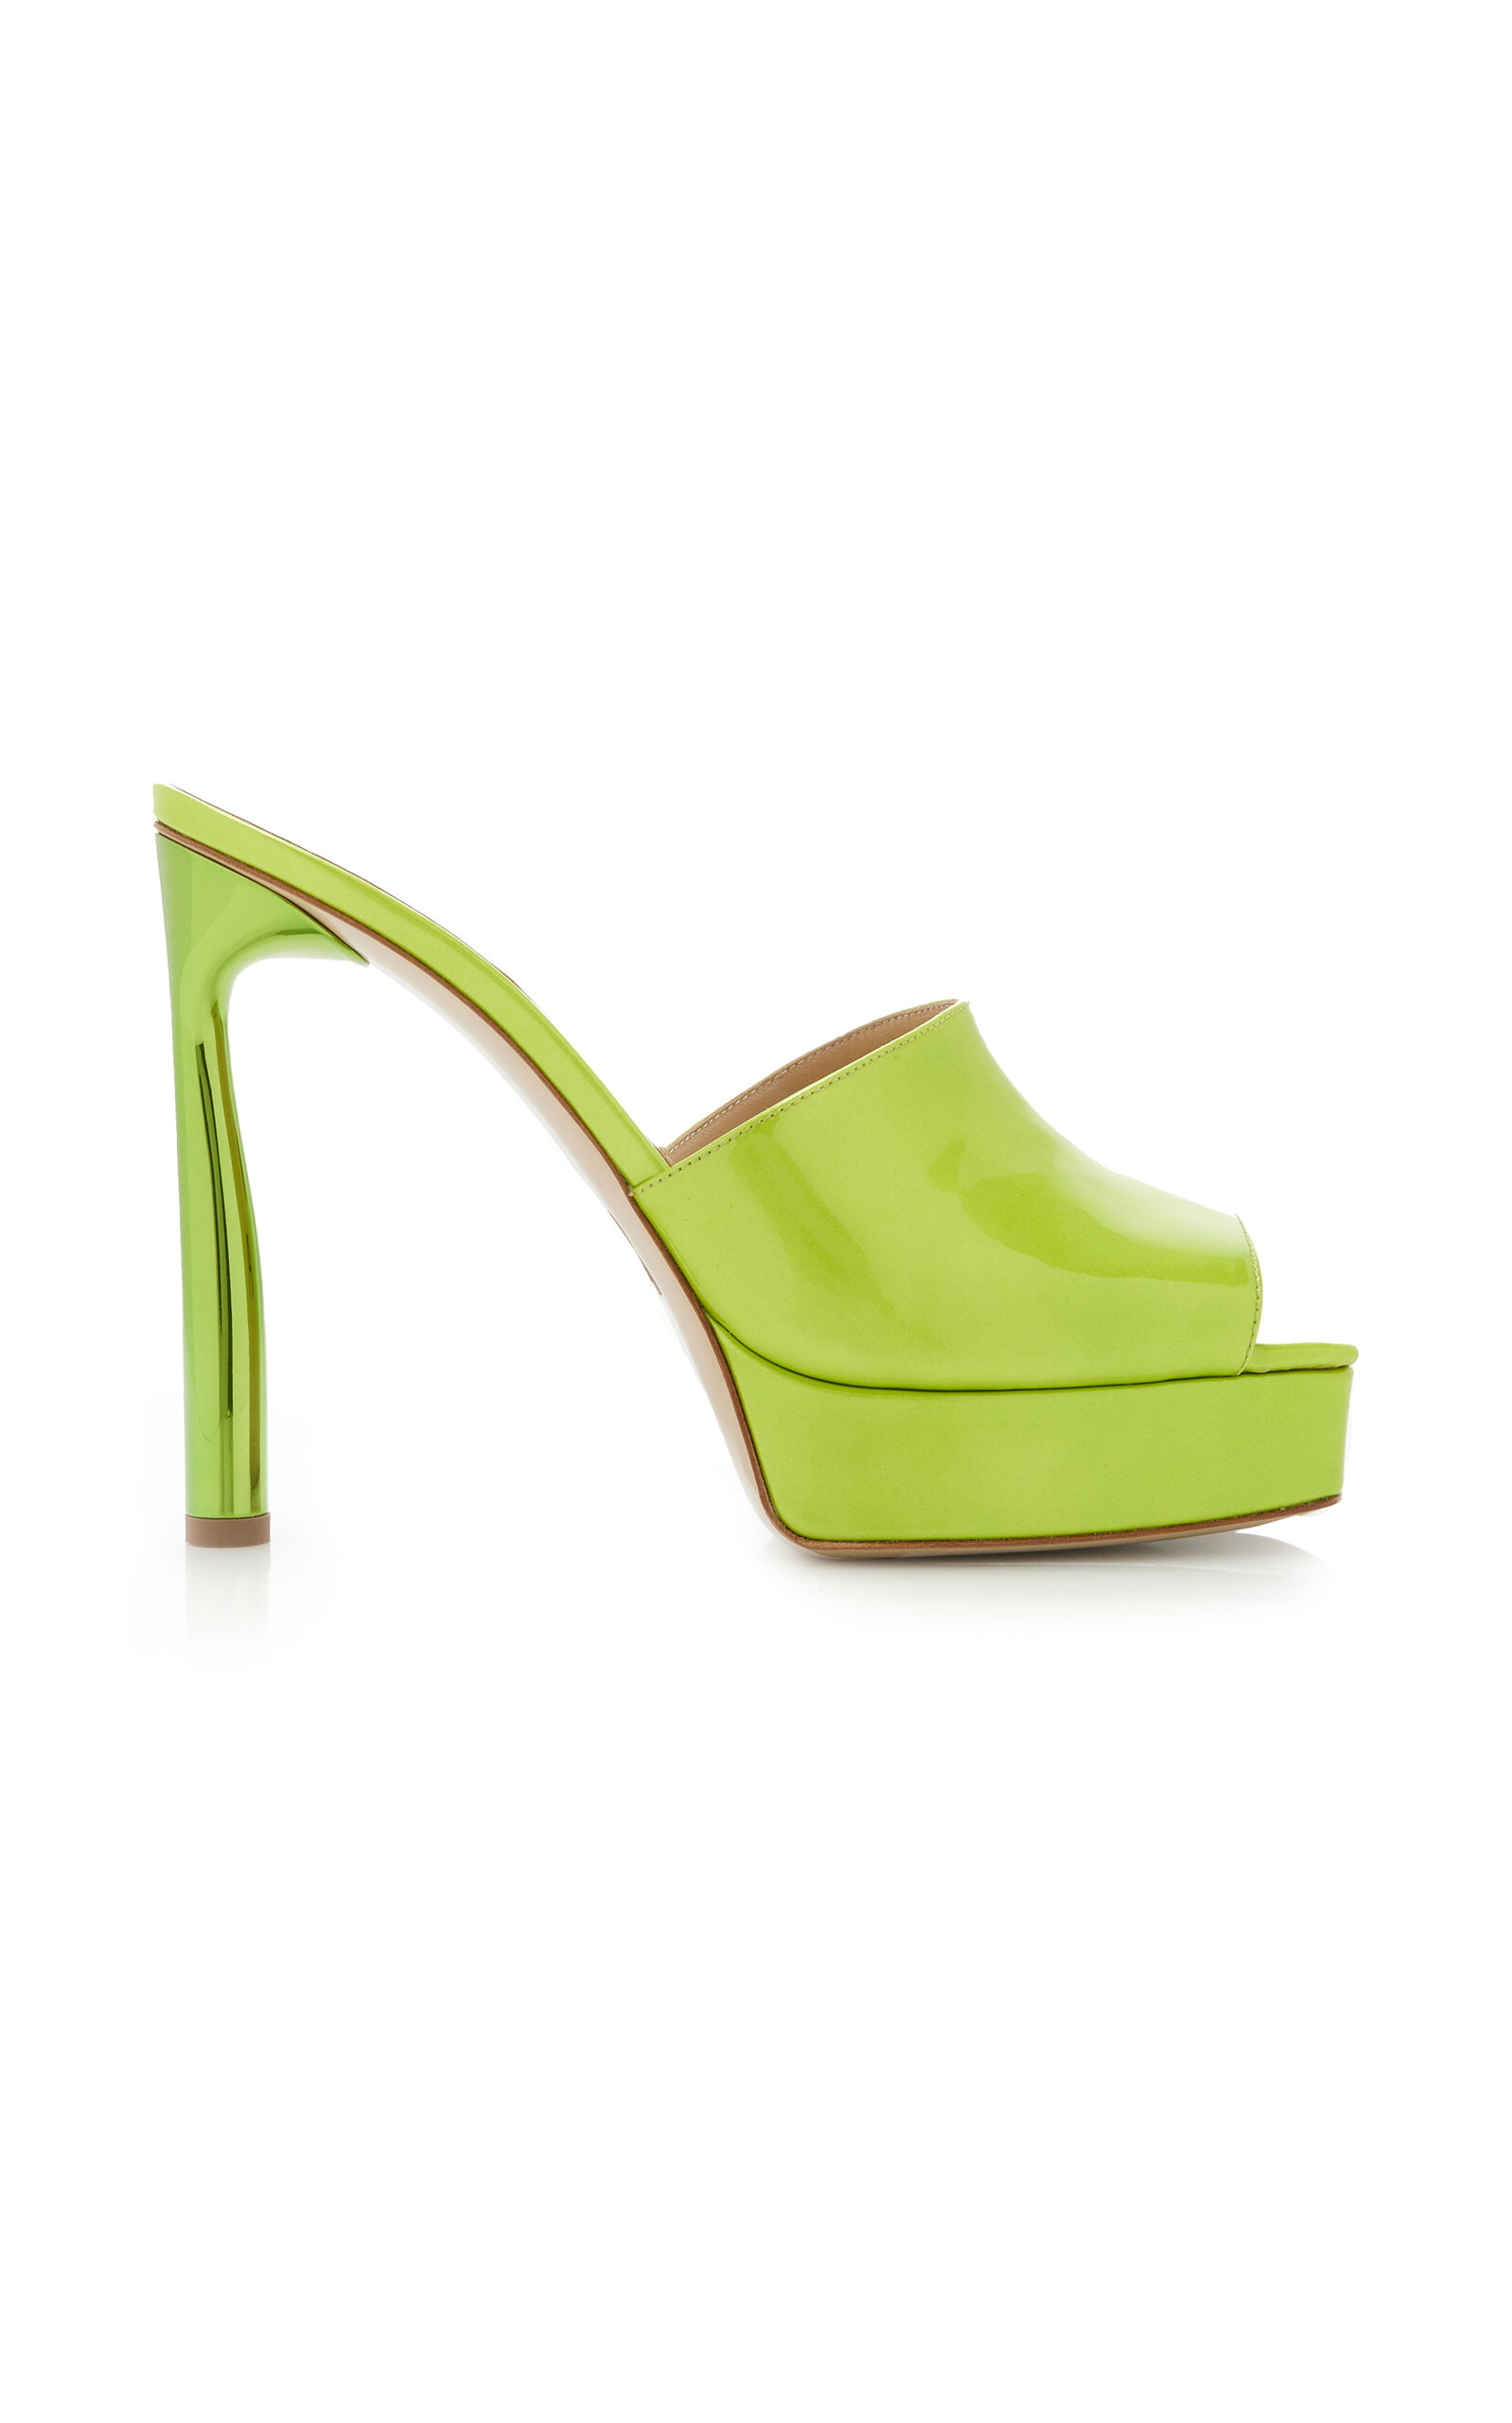 Paul Andrew Arc Glittered Patent Leather Platform Mules In Green